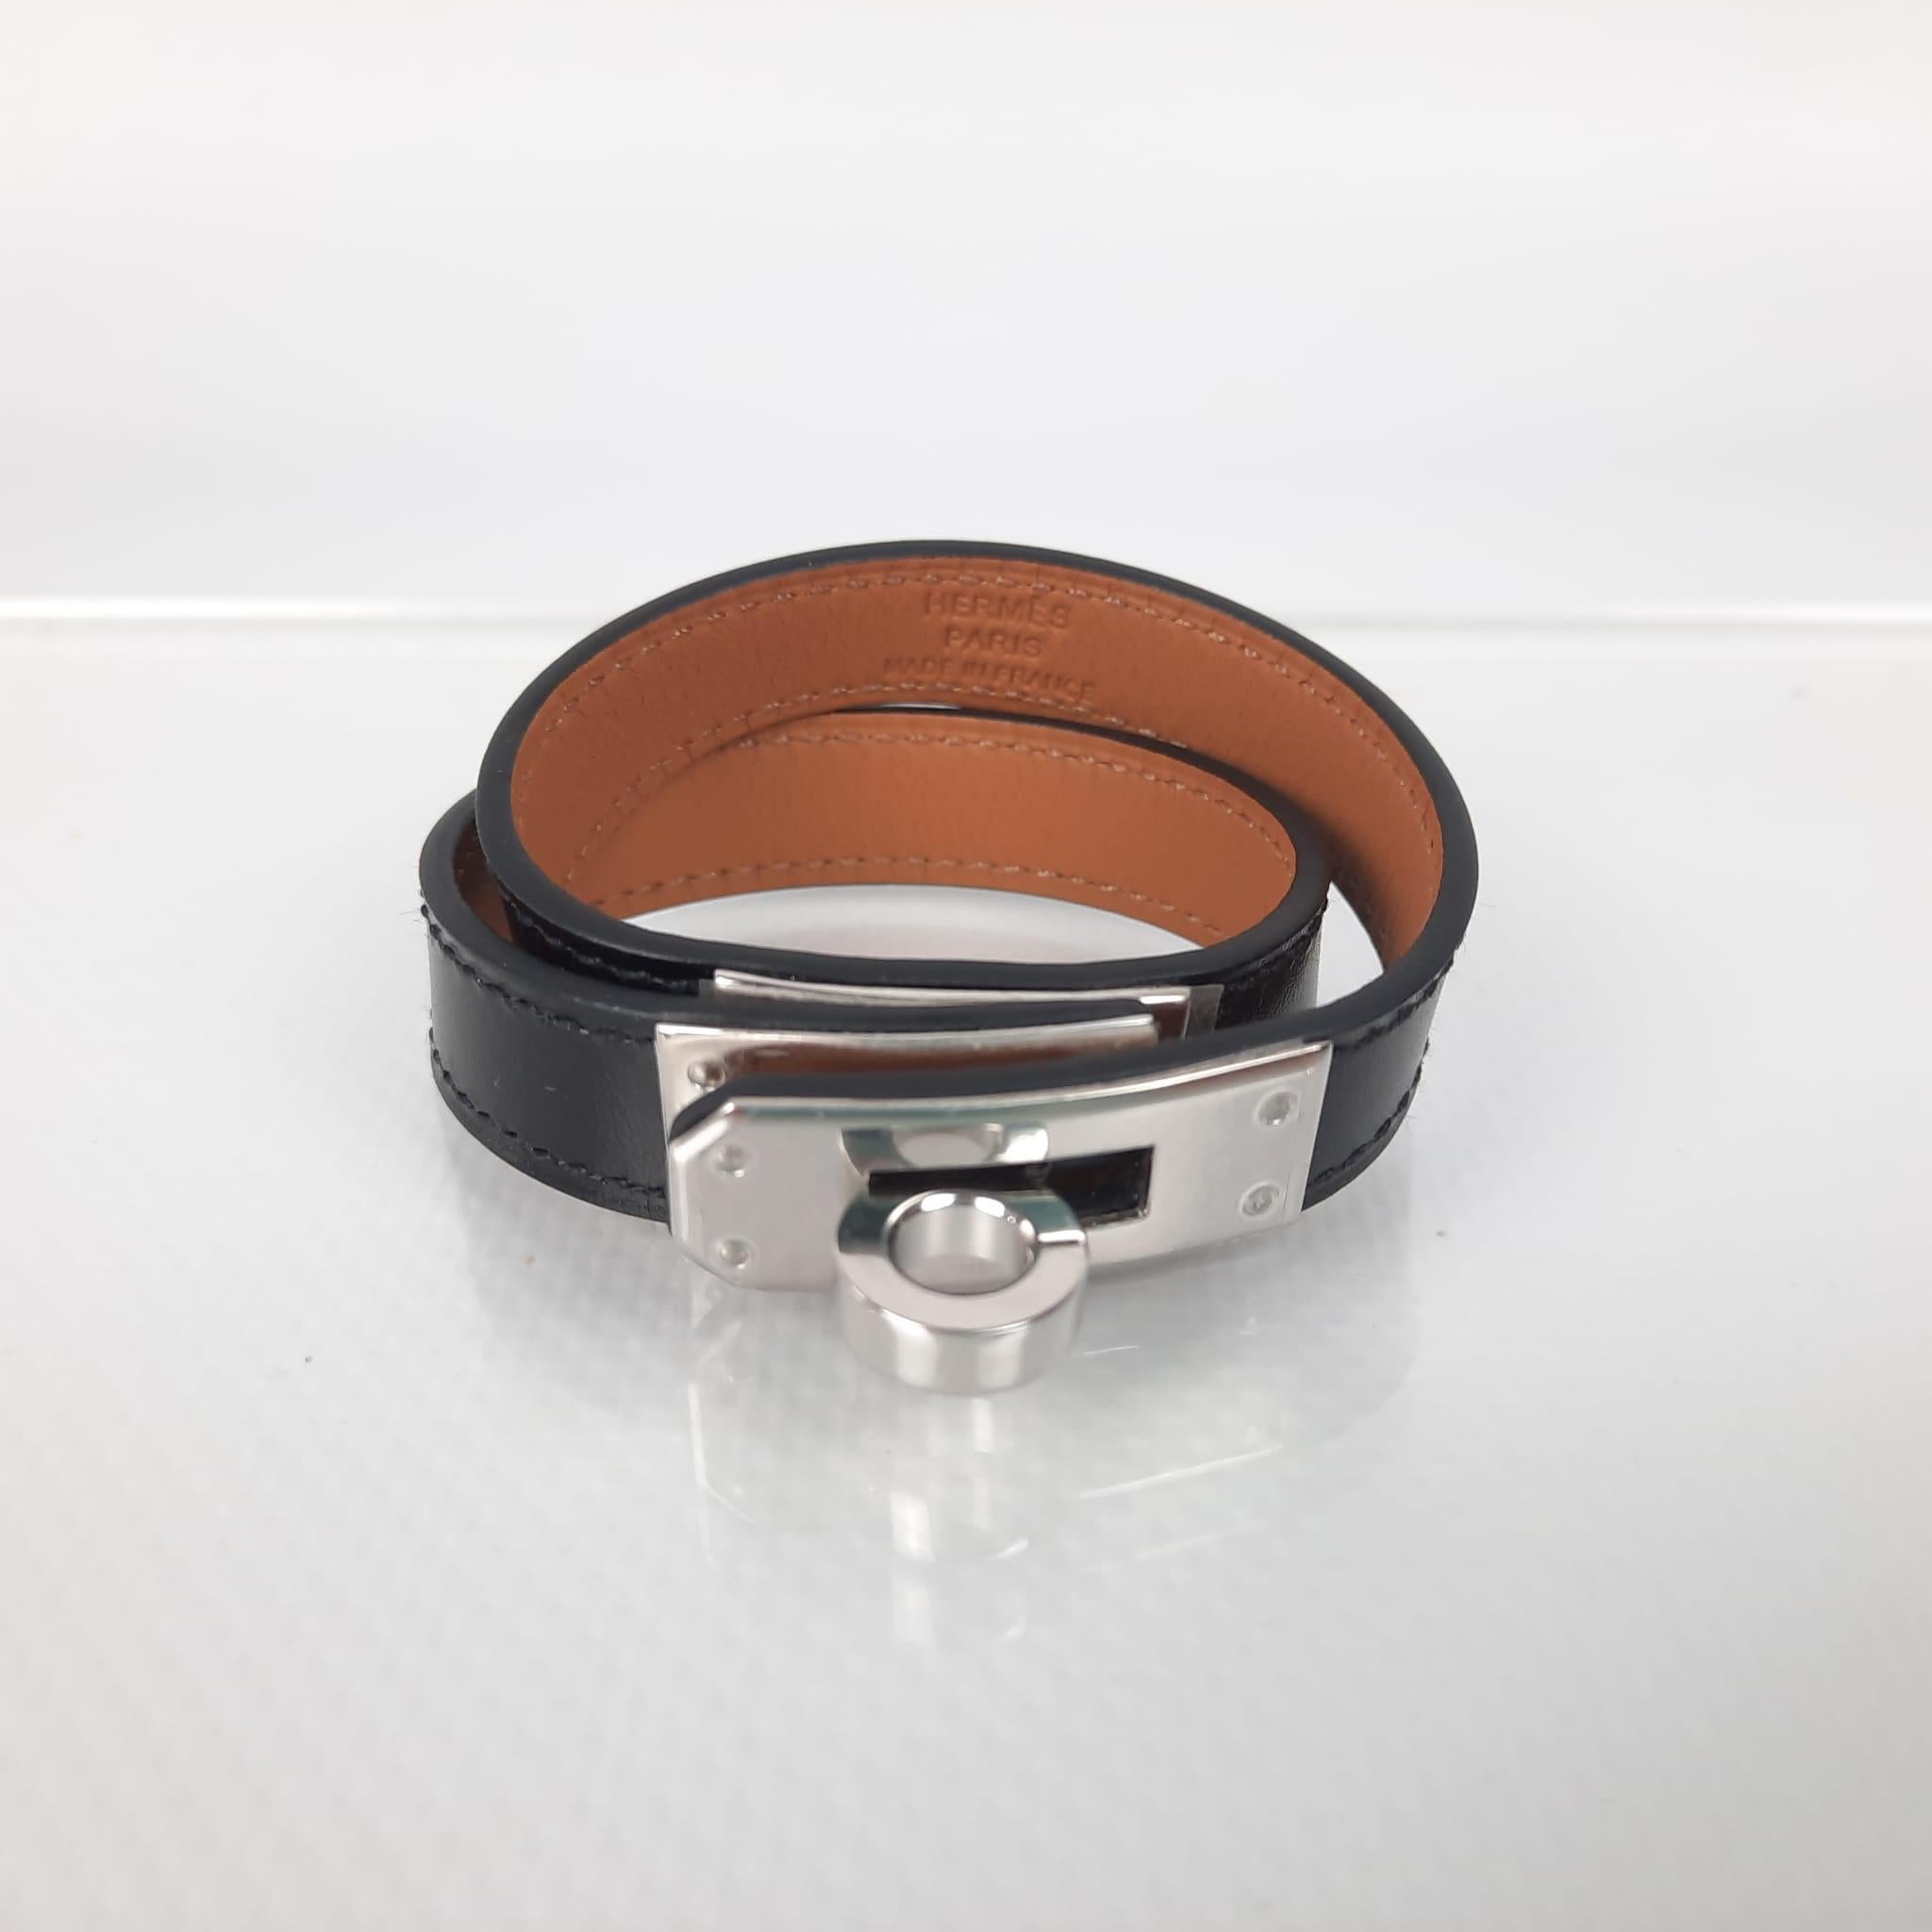 Size XS
Double tour bracelet in Box calfskin with palladium plated Kelly closure.
Wrist size up to 15.5 cm  Width: 3.5 cm